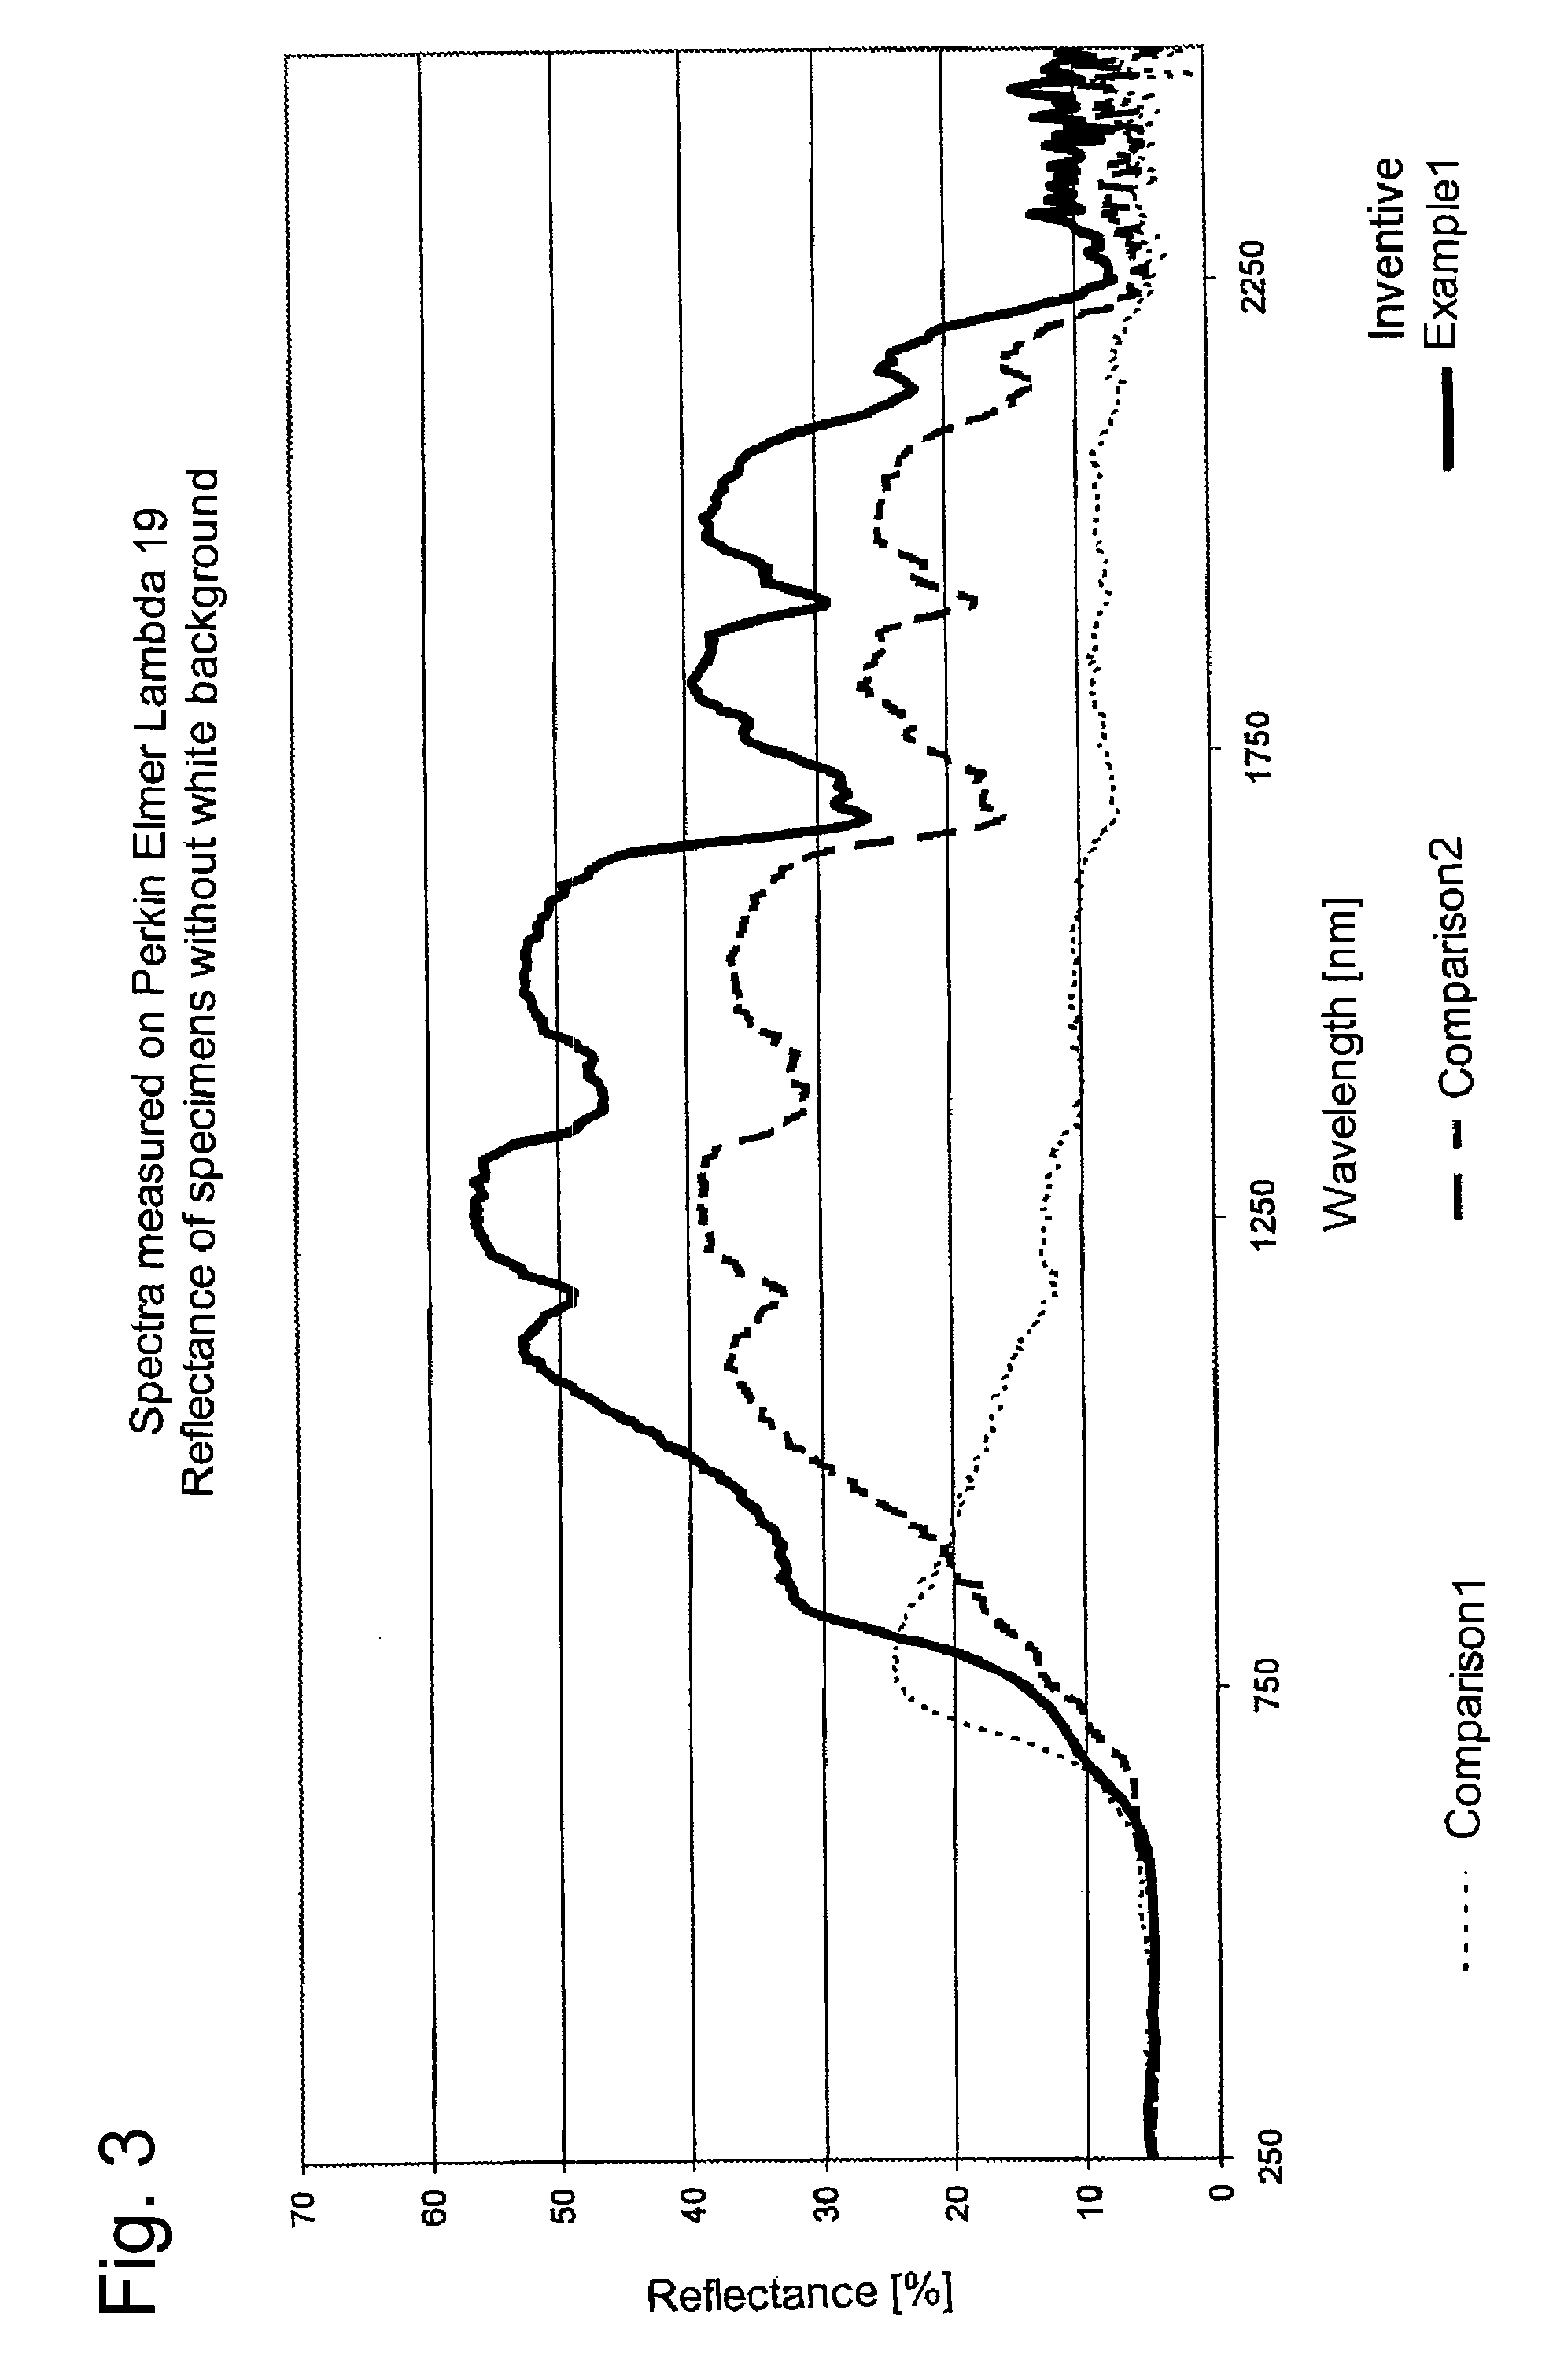 Opaquely colored, infra-red plastics molding composition and methods of making the opaquely colored, infra-red plastics molding compostion